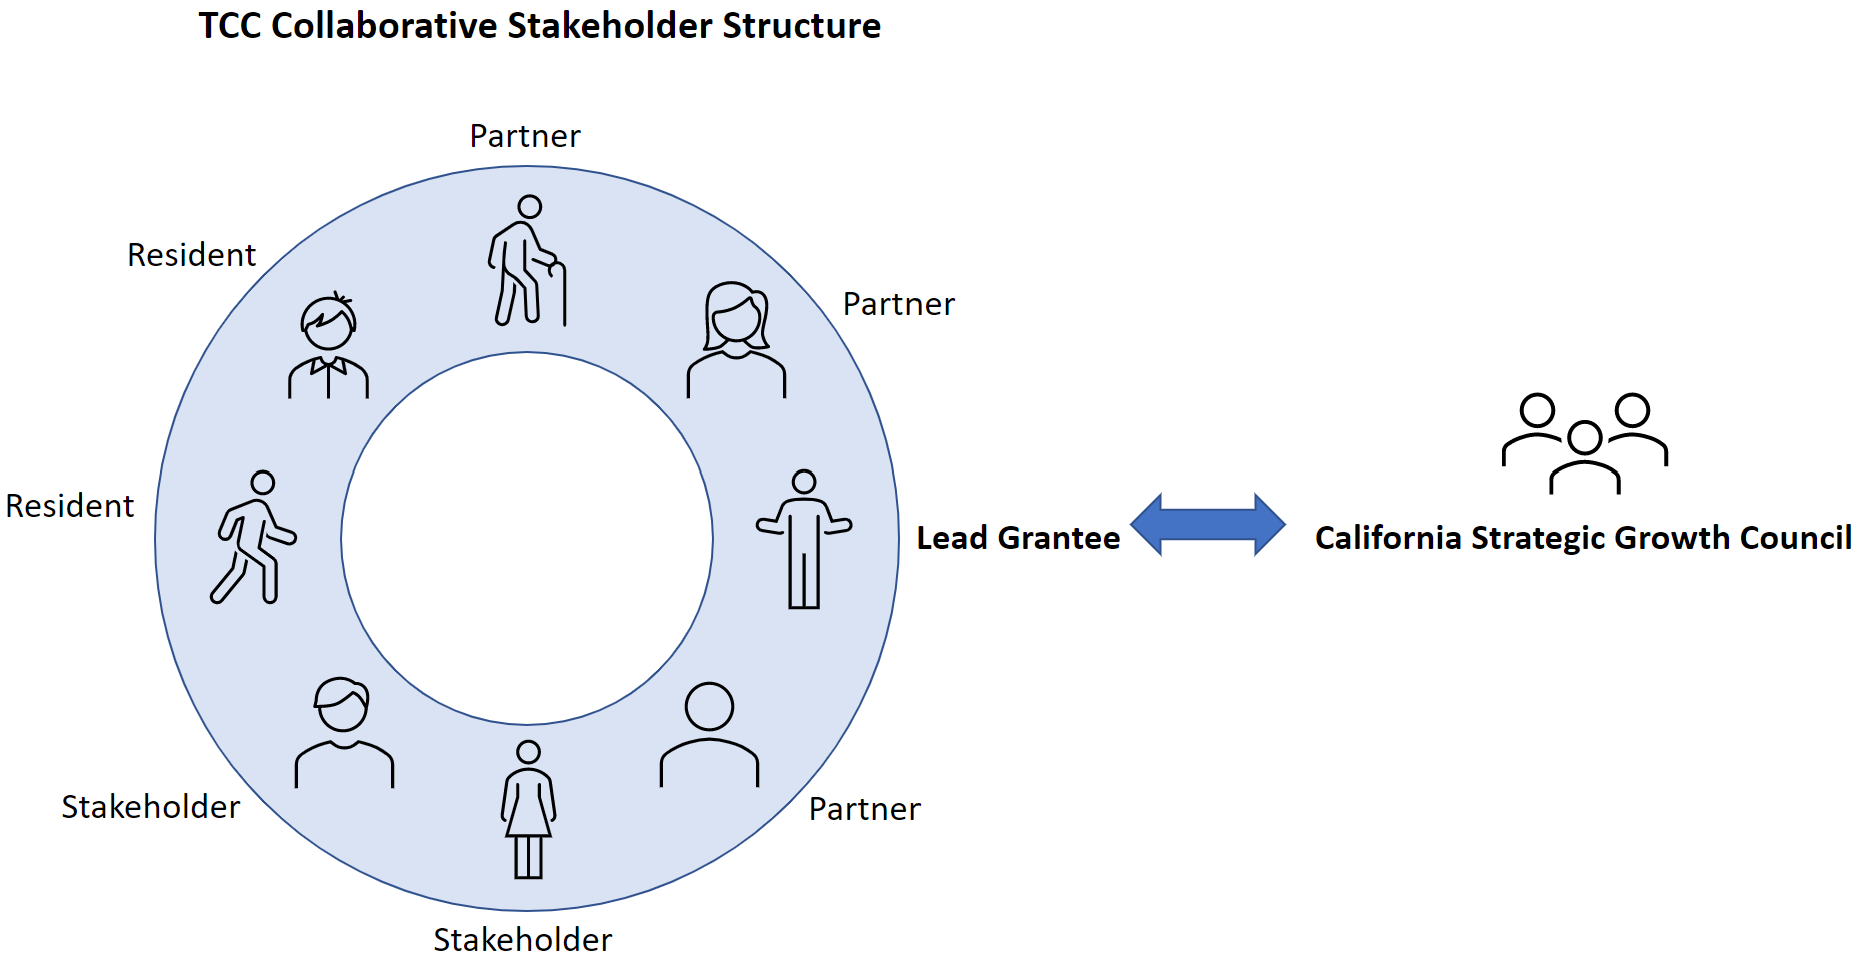 Stakeholder structure showing partners, stakeholders, residents, and the grantee interfacing with the California Strategic Growth Council